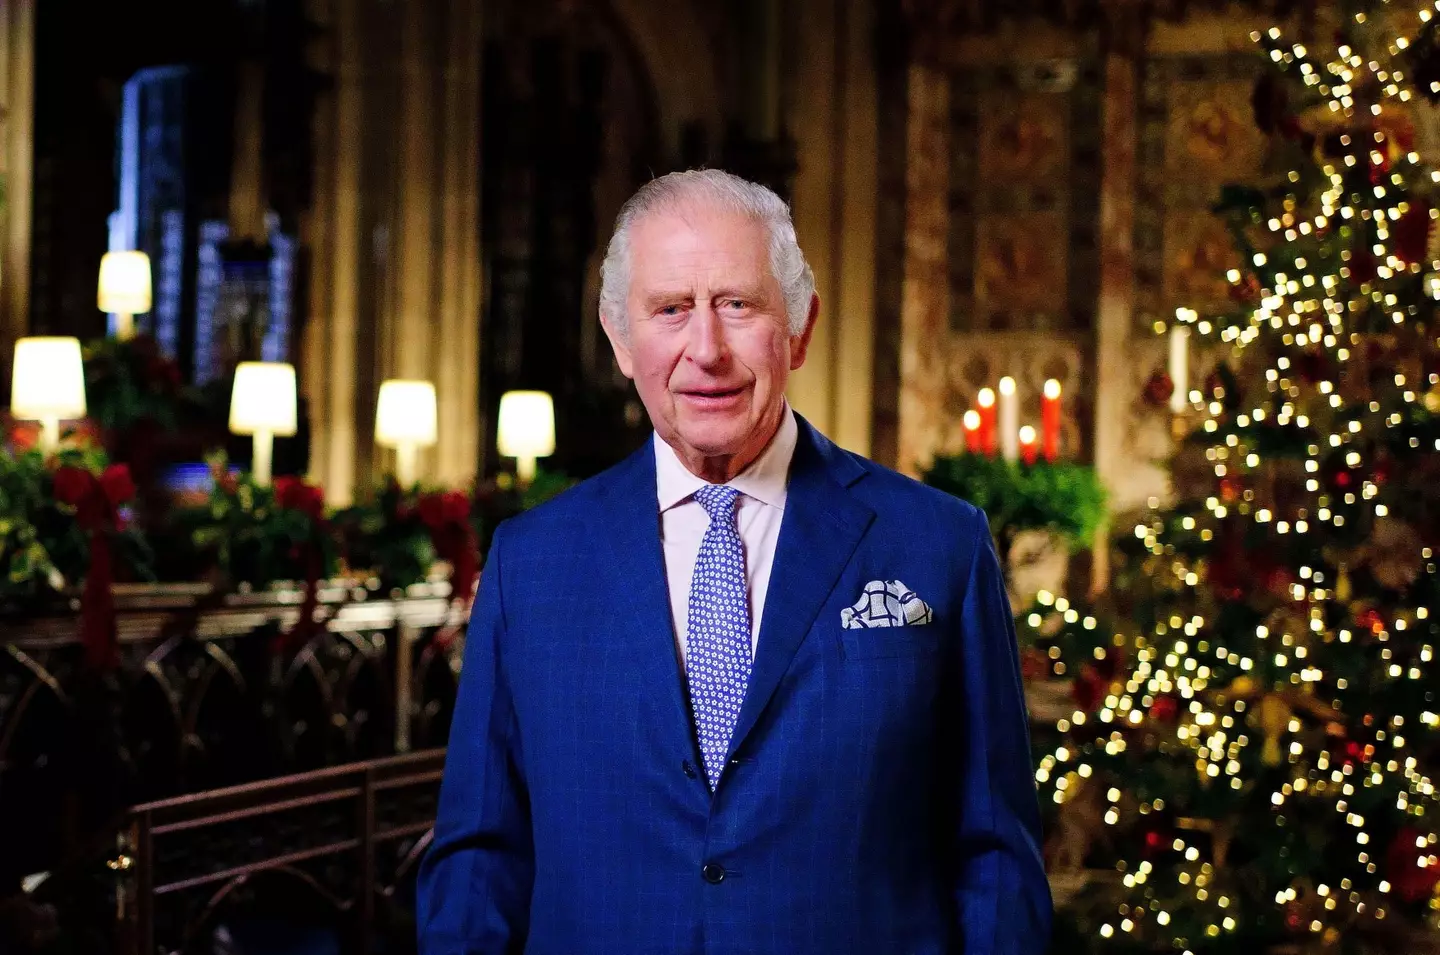 King Charles has delivered his first Christmas speech.